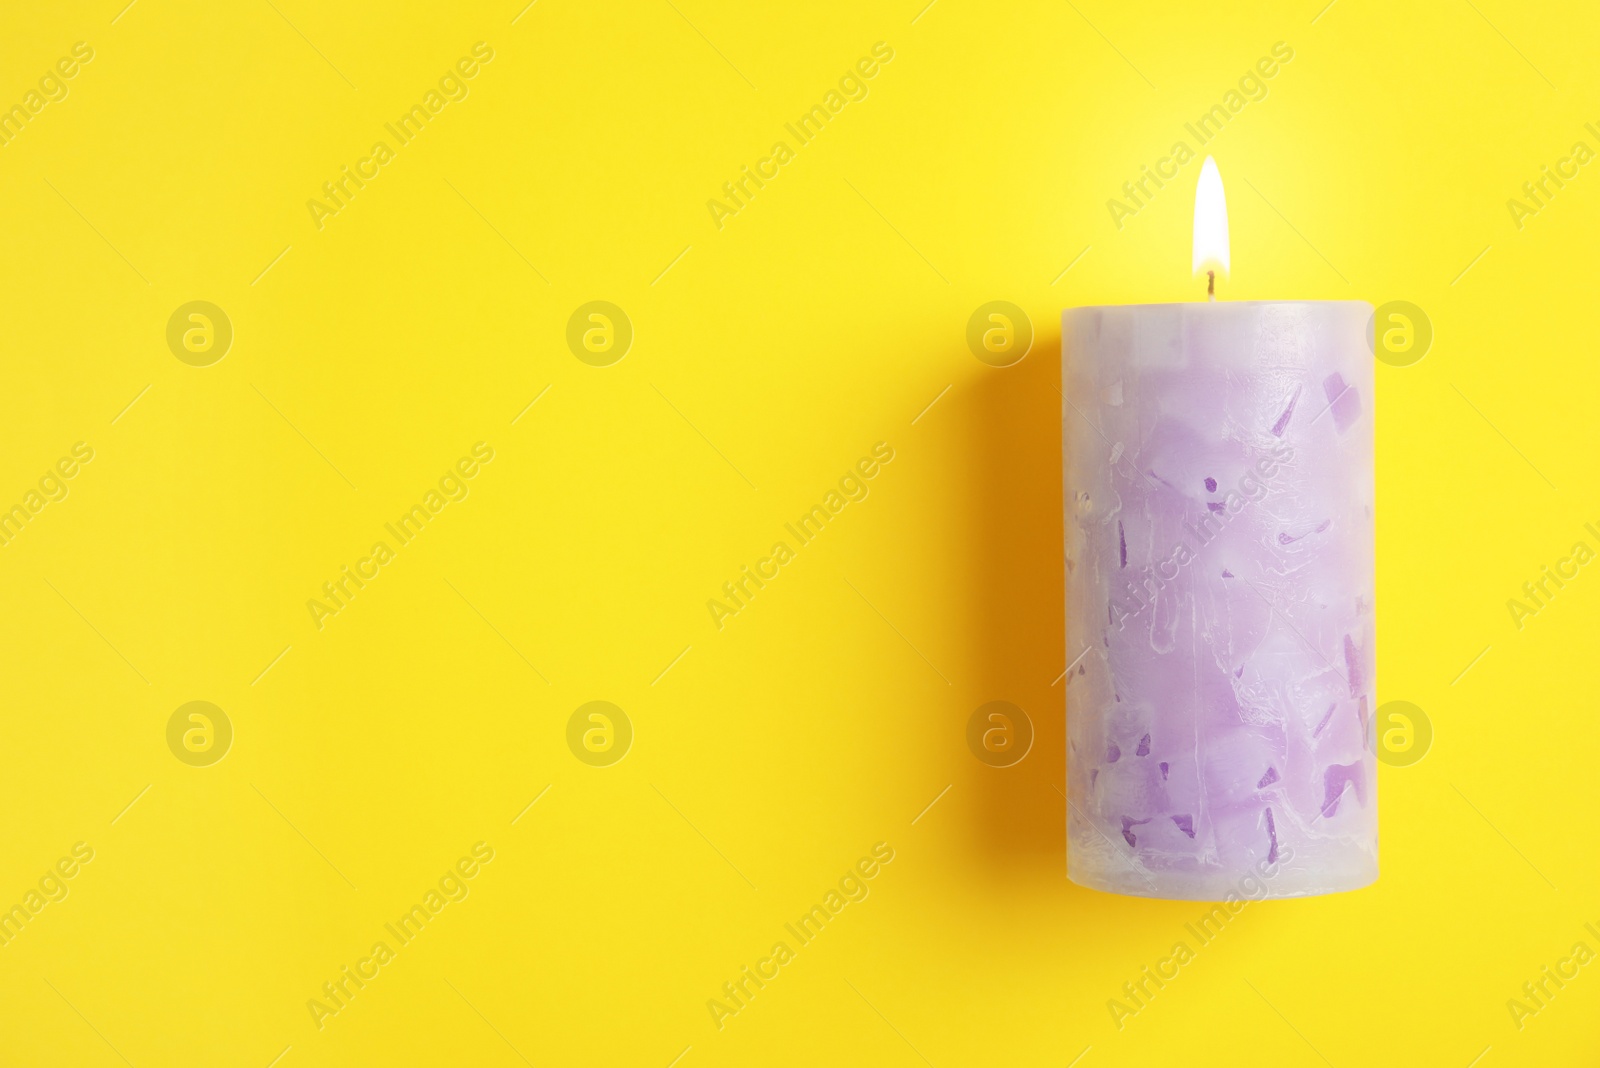 Photo of Alight wax candle and space for text on color background